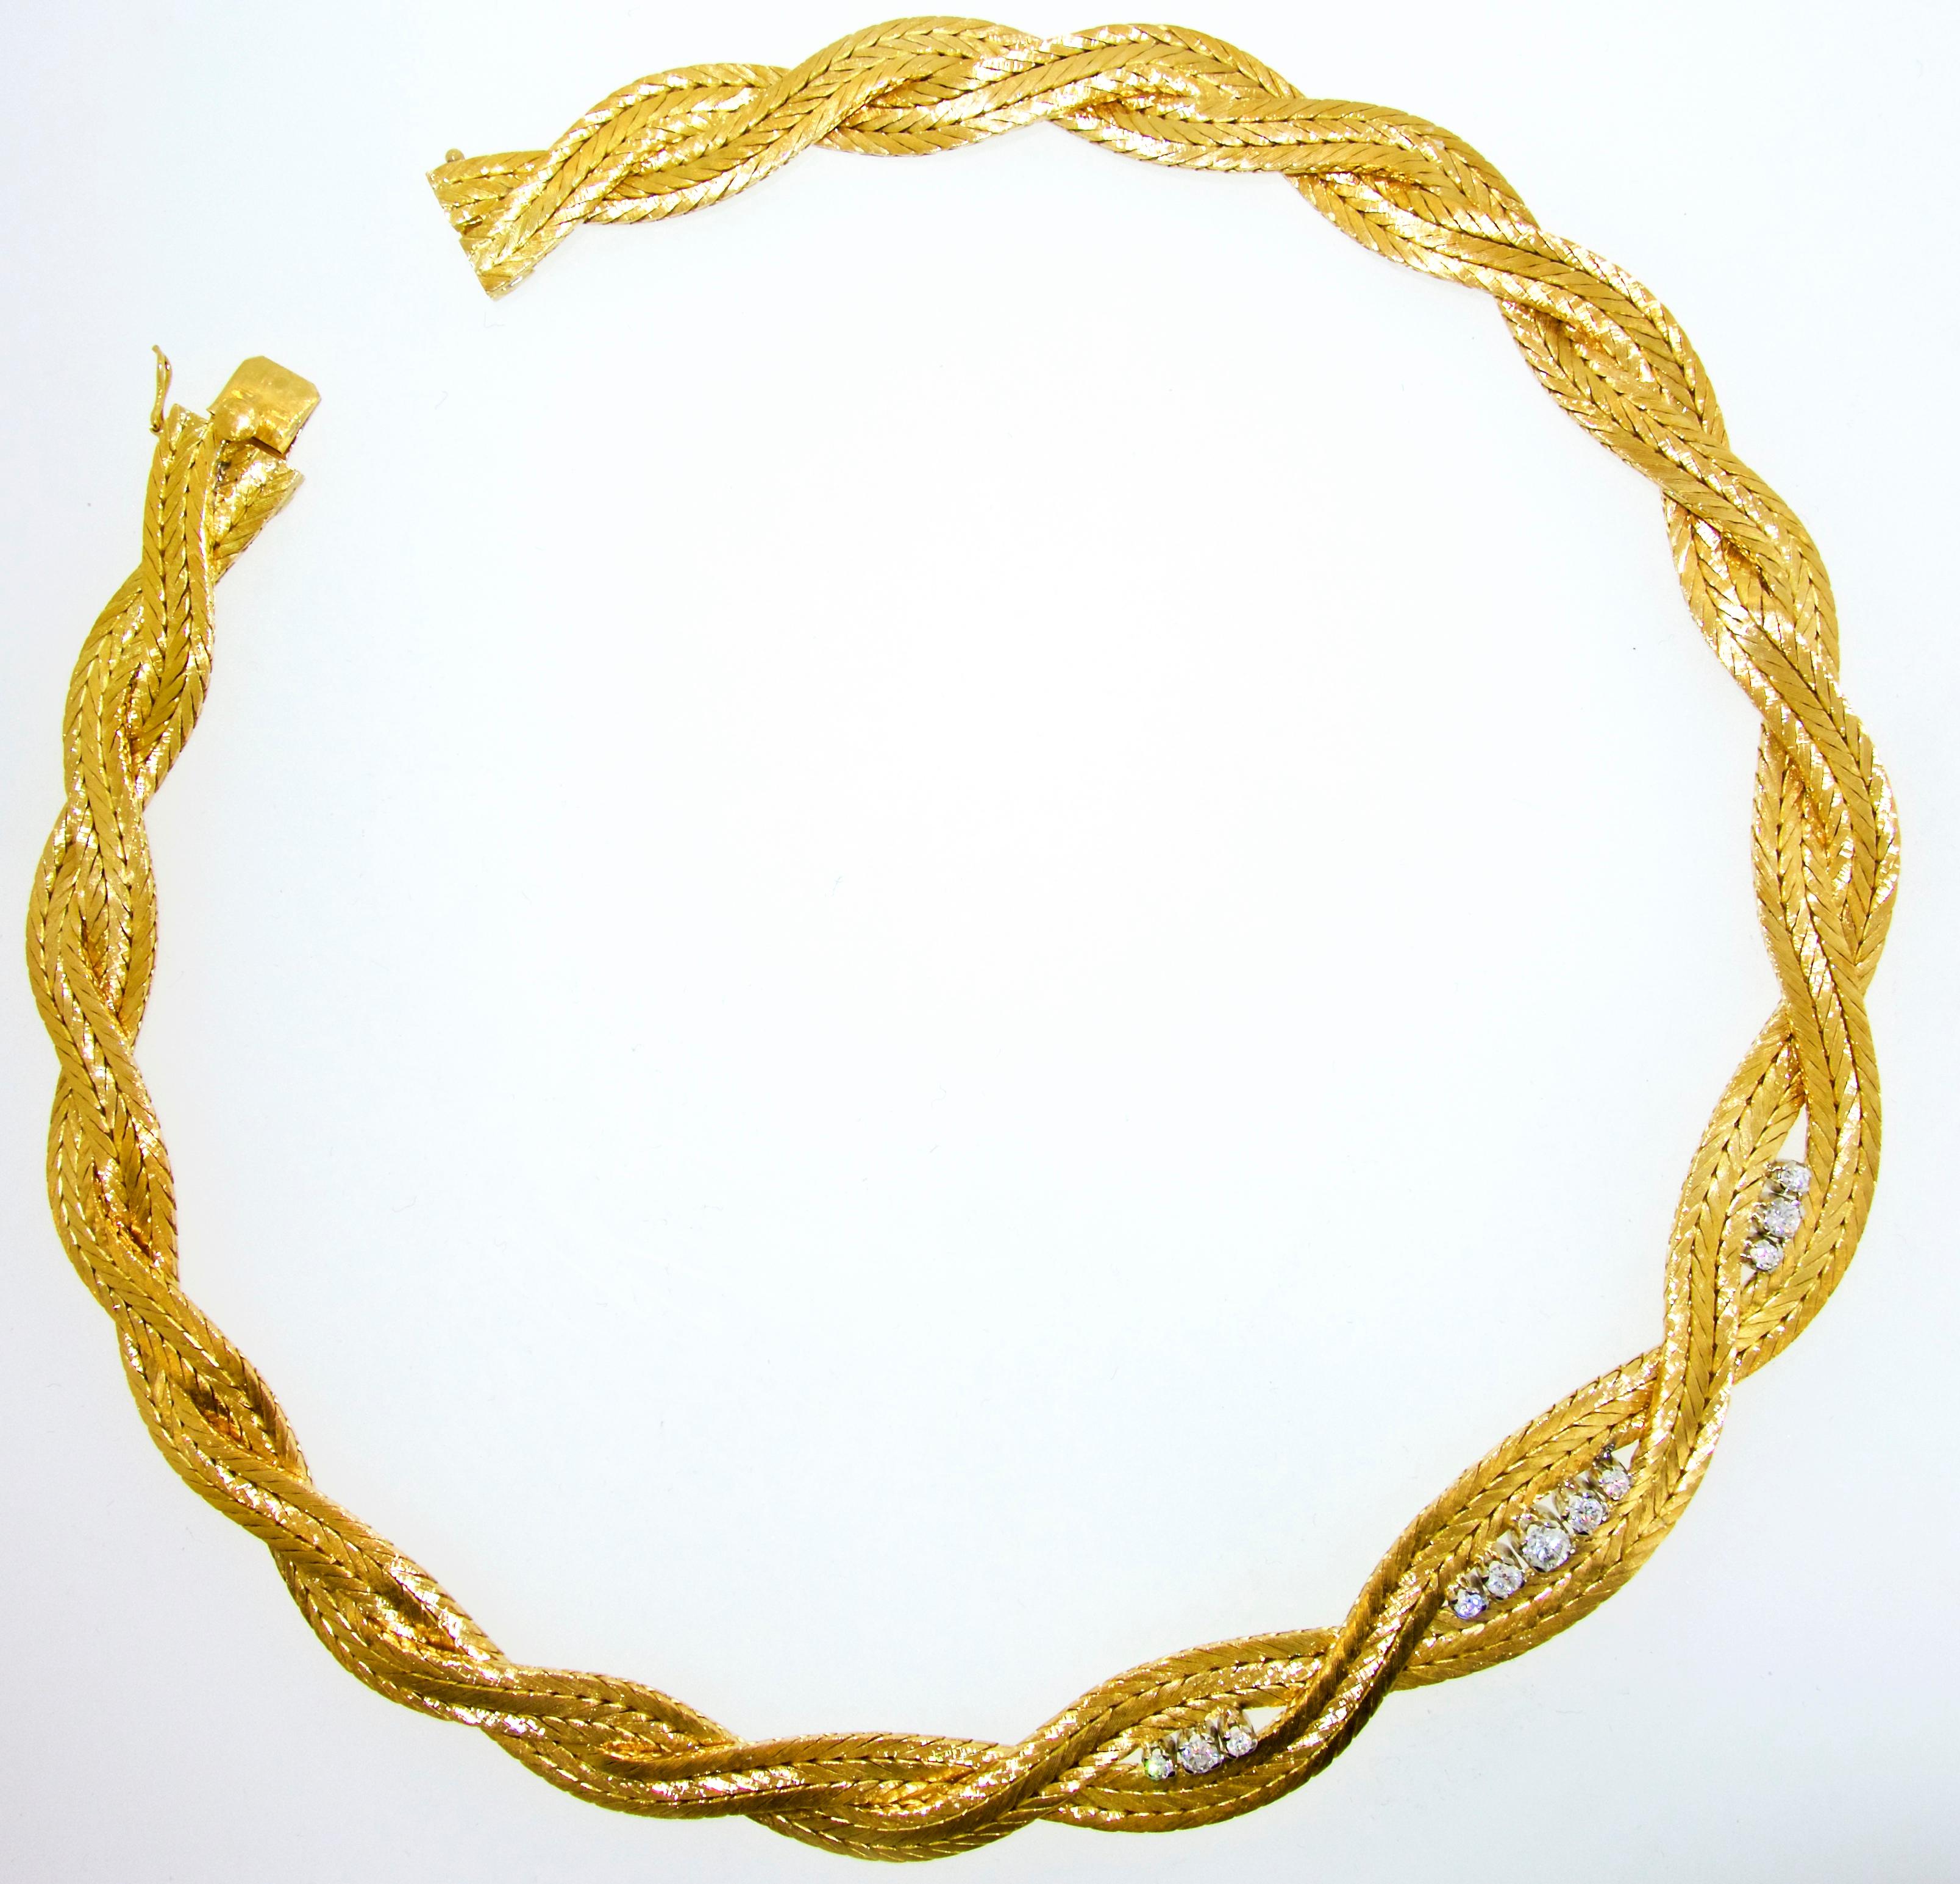 18K bright yellow gold set in the front with fine white diamonds (H,VS1).  The round brilliant cut diamonds are well set and matched and weigh approximately .75 cts.  This collar-necklace fits right right at the collar bone (note that our mannequin